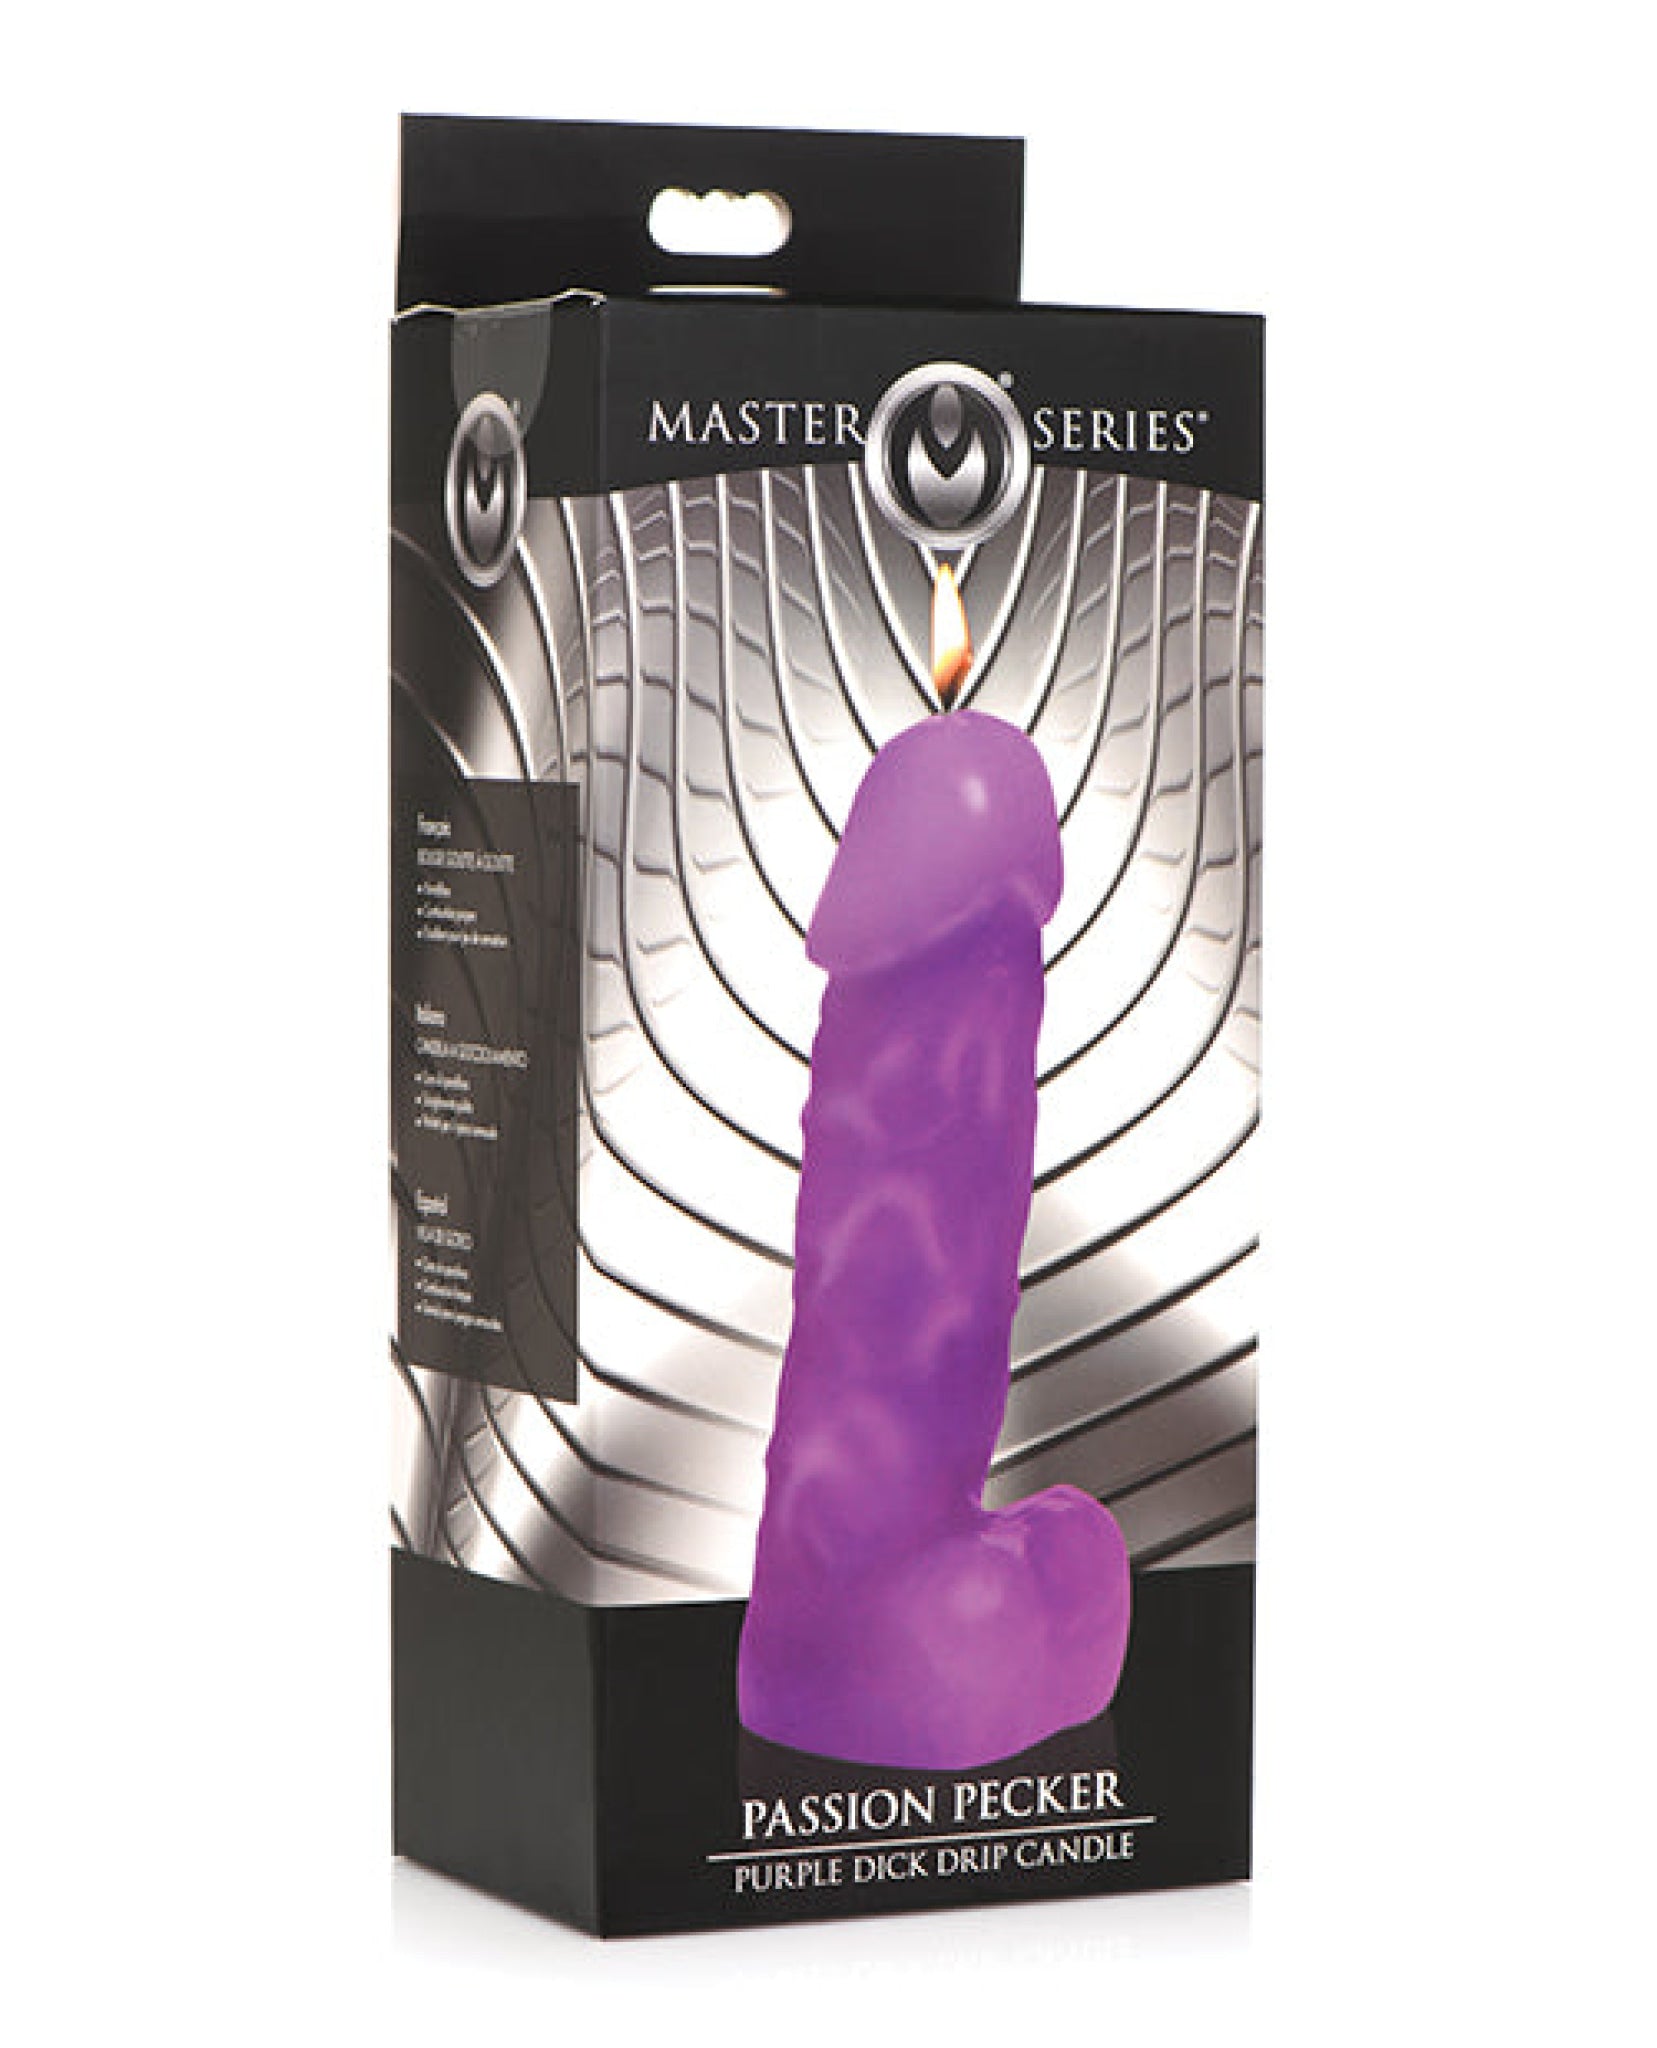 Master Series Passion Pecker Dick Drip Candle - Purple Master Series